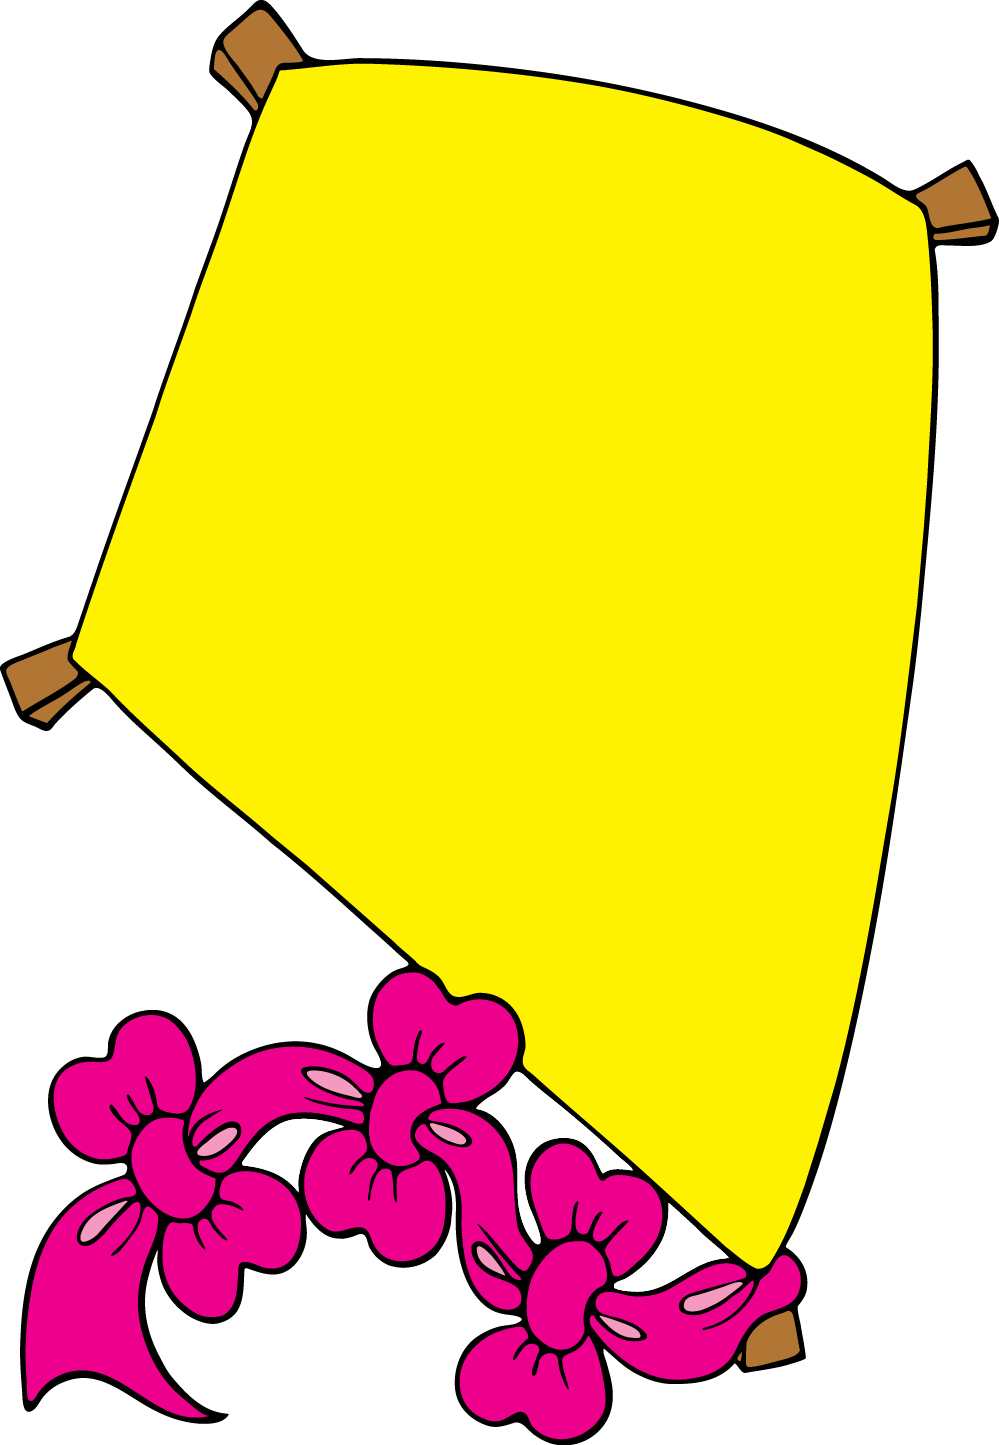 A Yellow Flag With Pink Flowers